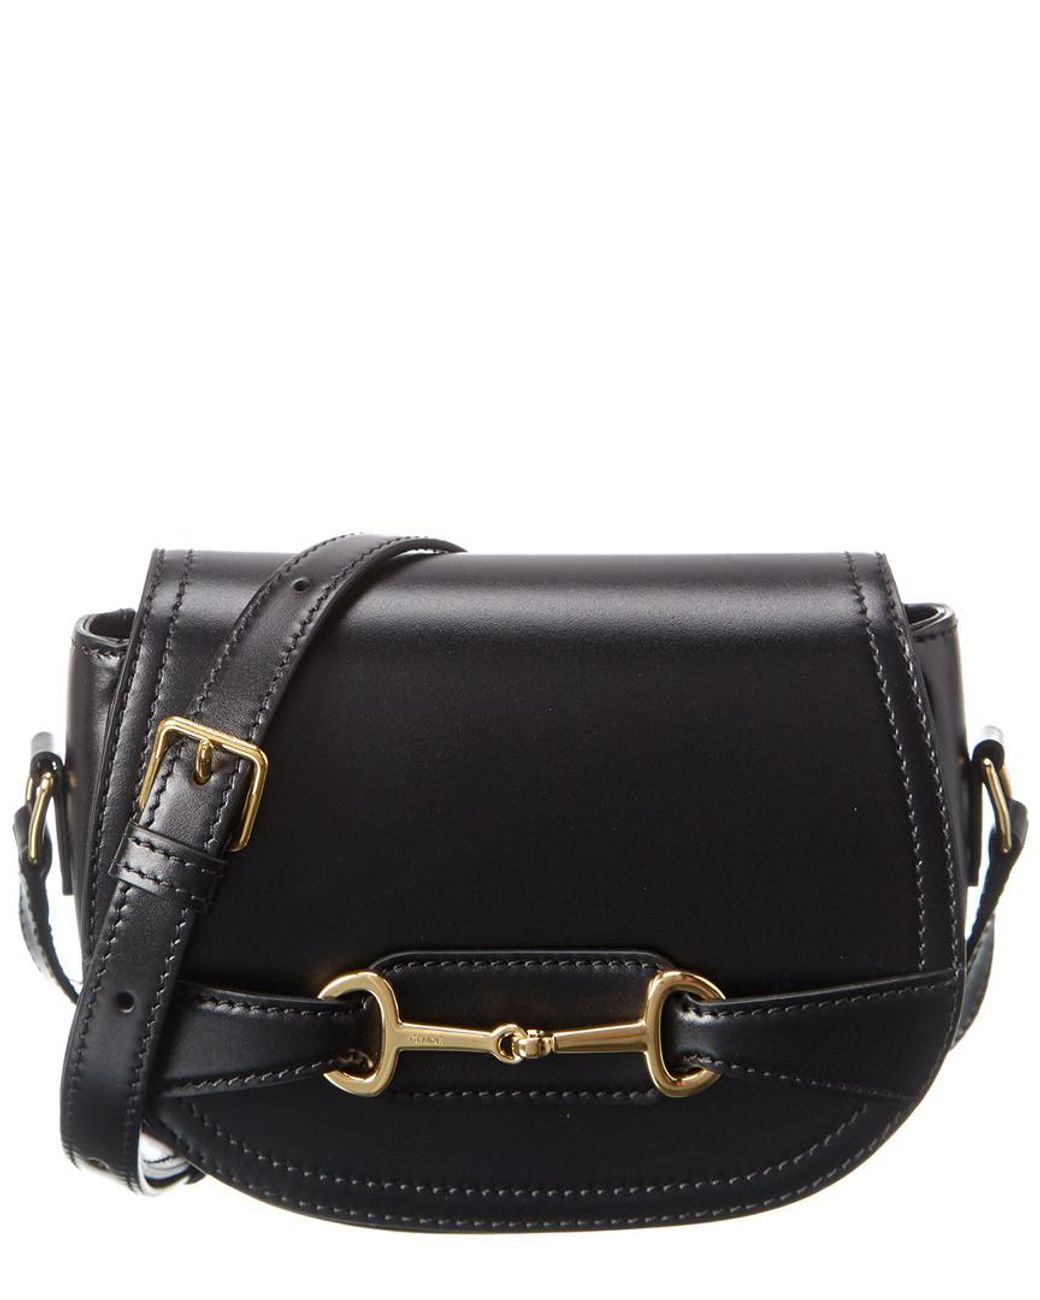 Celine Small Crecy Leather Shoulder Bag in Black | Lyst